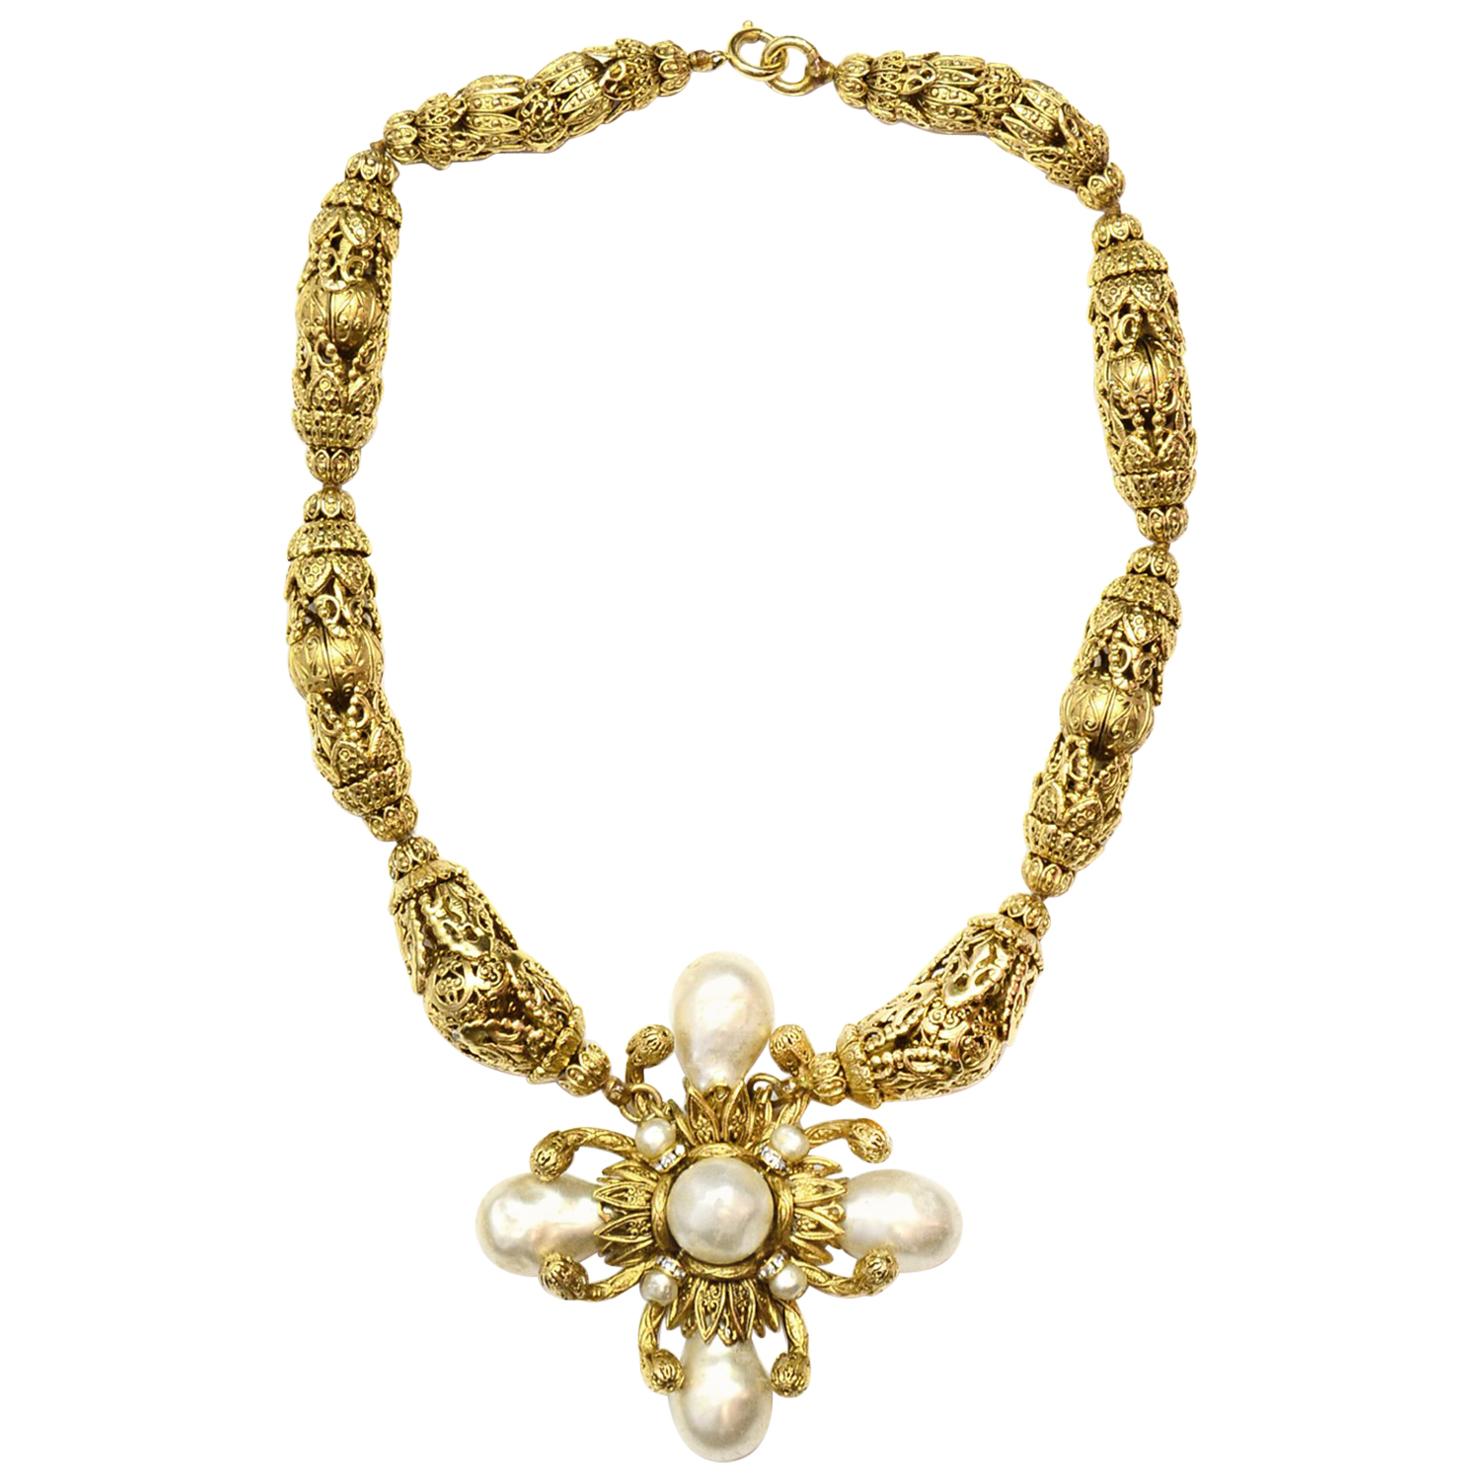 Chanel Vintage Gold Filigree Necklace W/ Faux Pearl Cross 